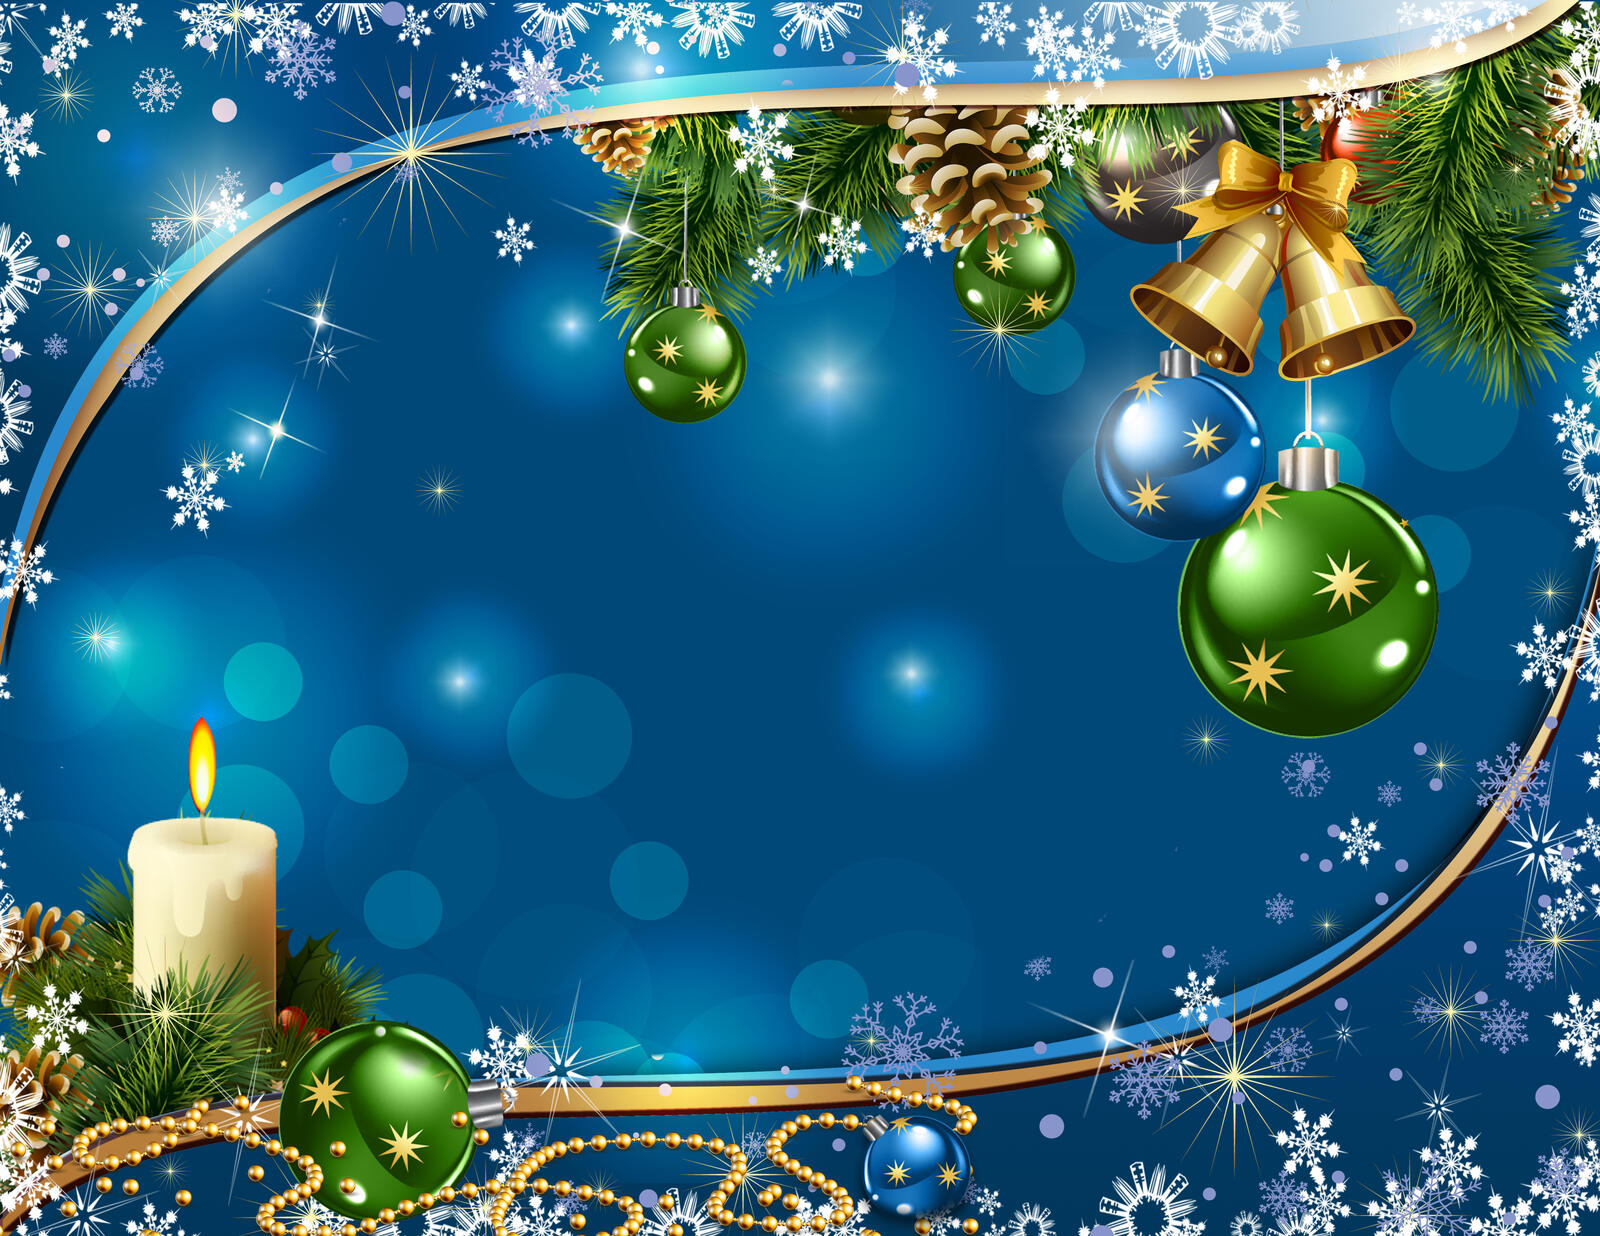 Wallpapers Christmas Wallpaper background decoration on the desktop